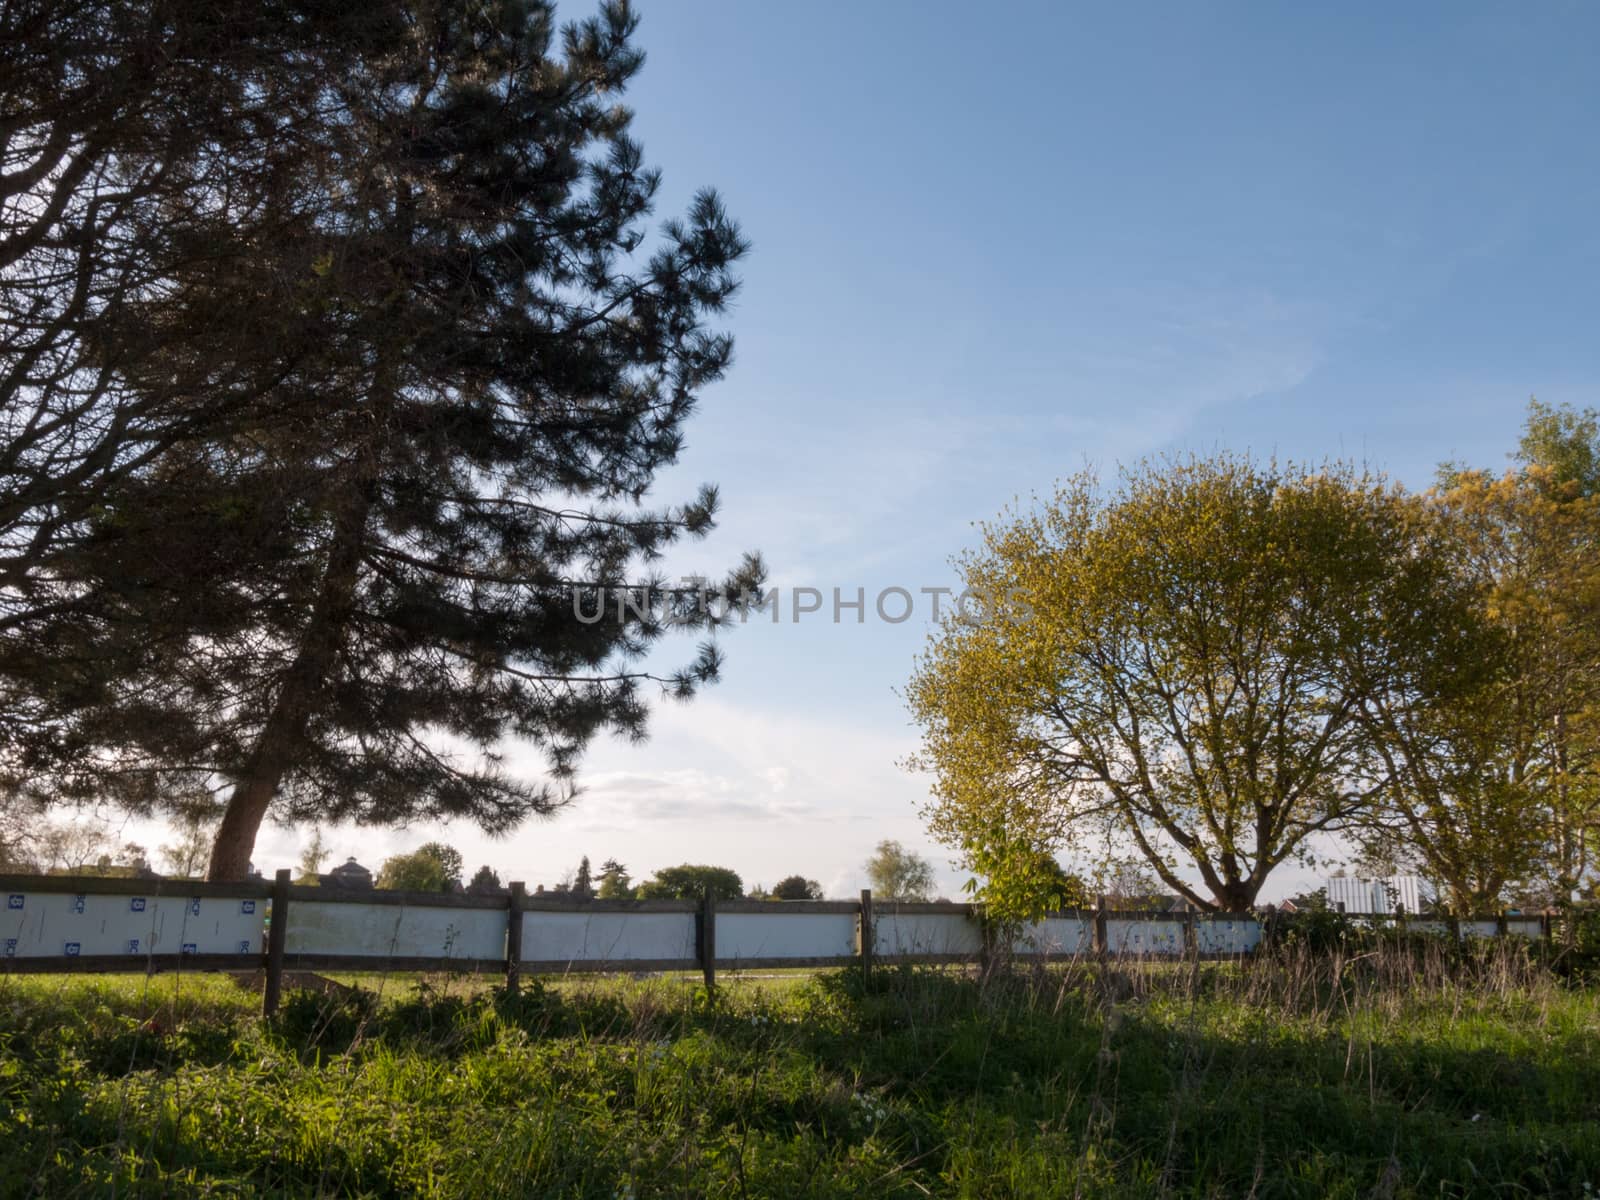 a fence a field some trees and a setting sun creating a beautiful scene relaxing and peace natural landscape in spring